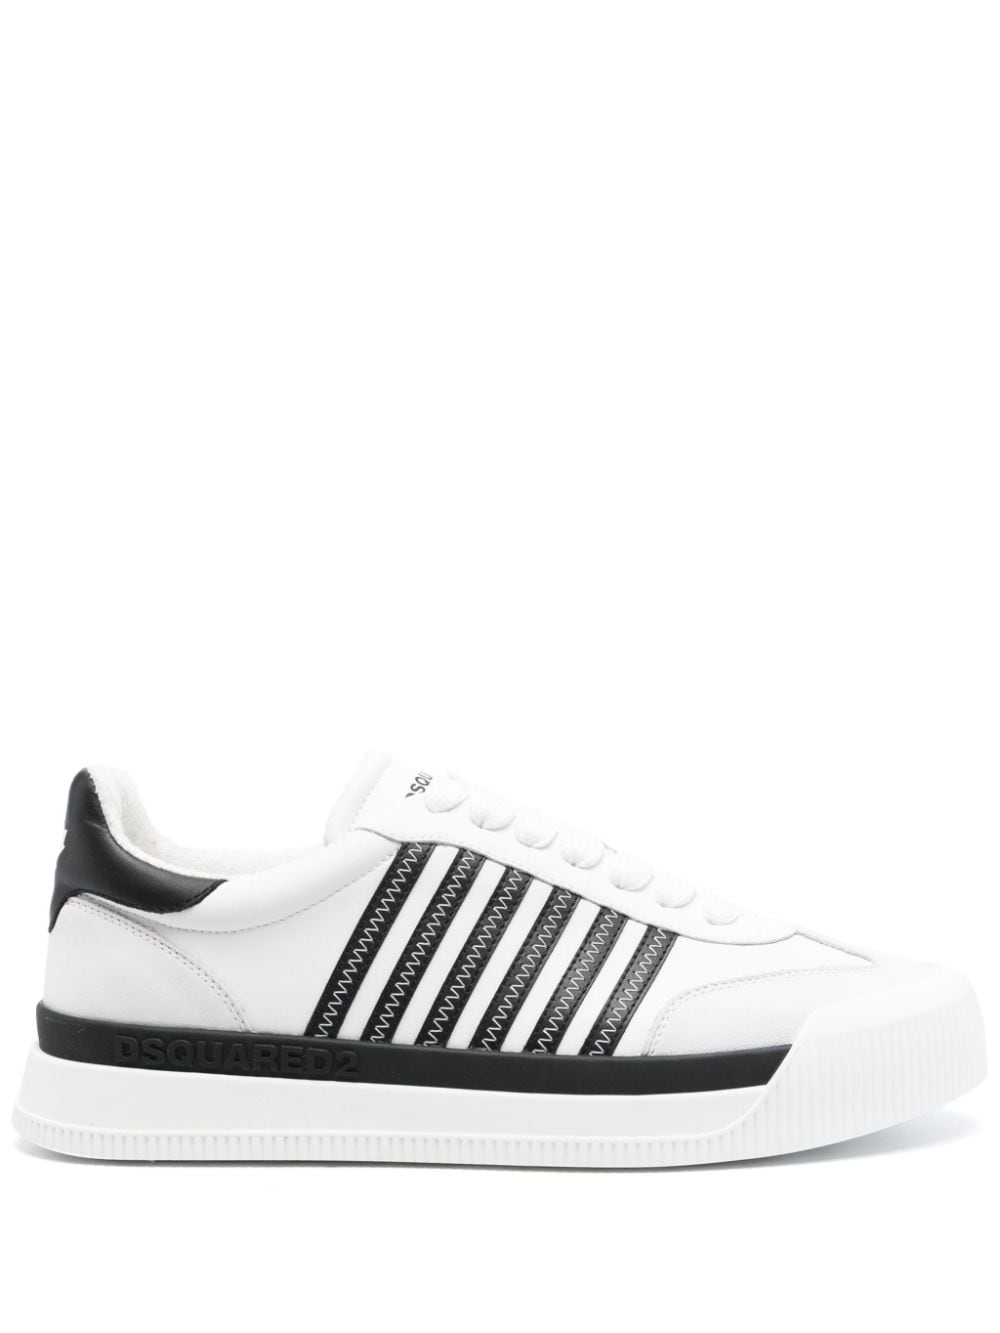 Dsquared2 New Jersey Sneakers - Weiß von Dsquared2